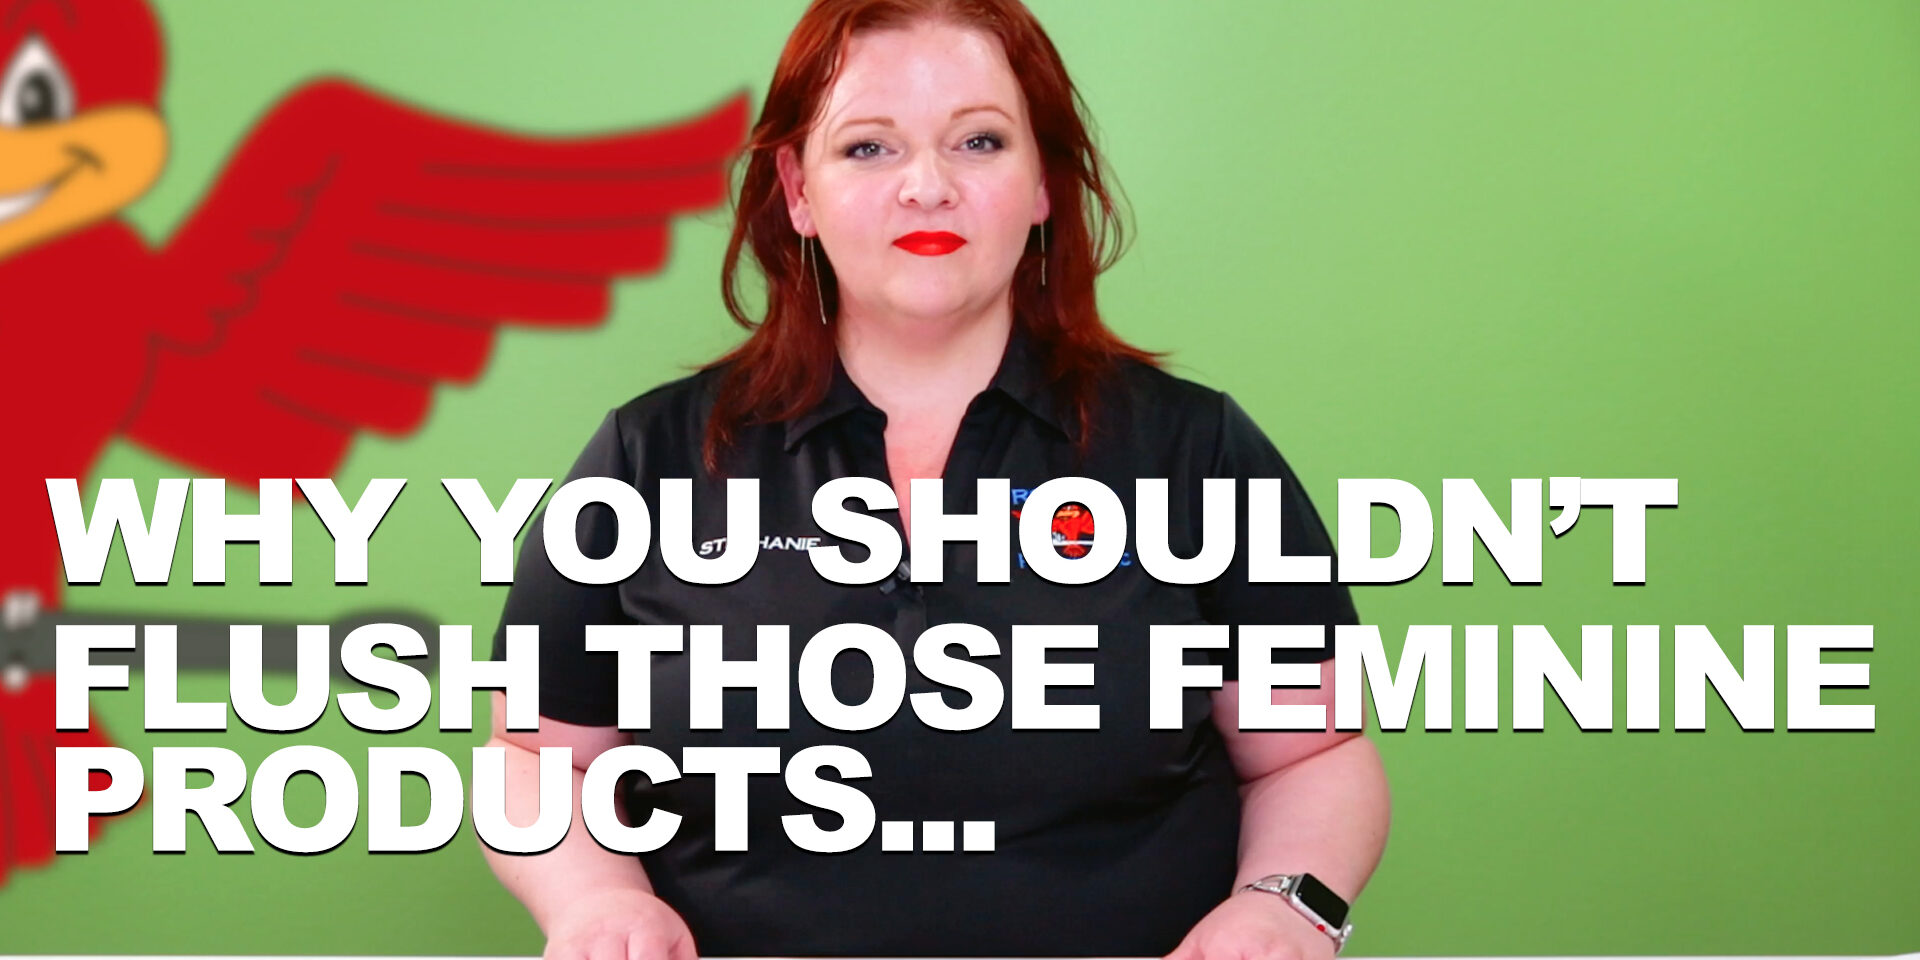 Cover photo for blog and video "Why You Shouldn't Flush Those Feminine Products"